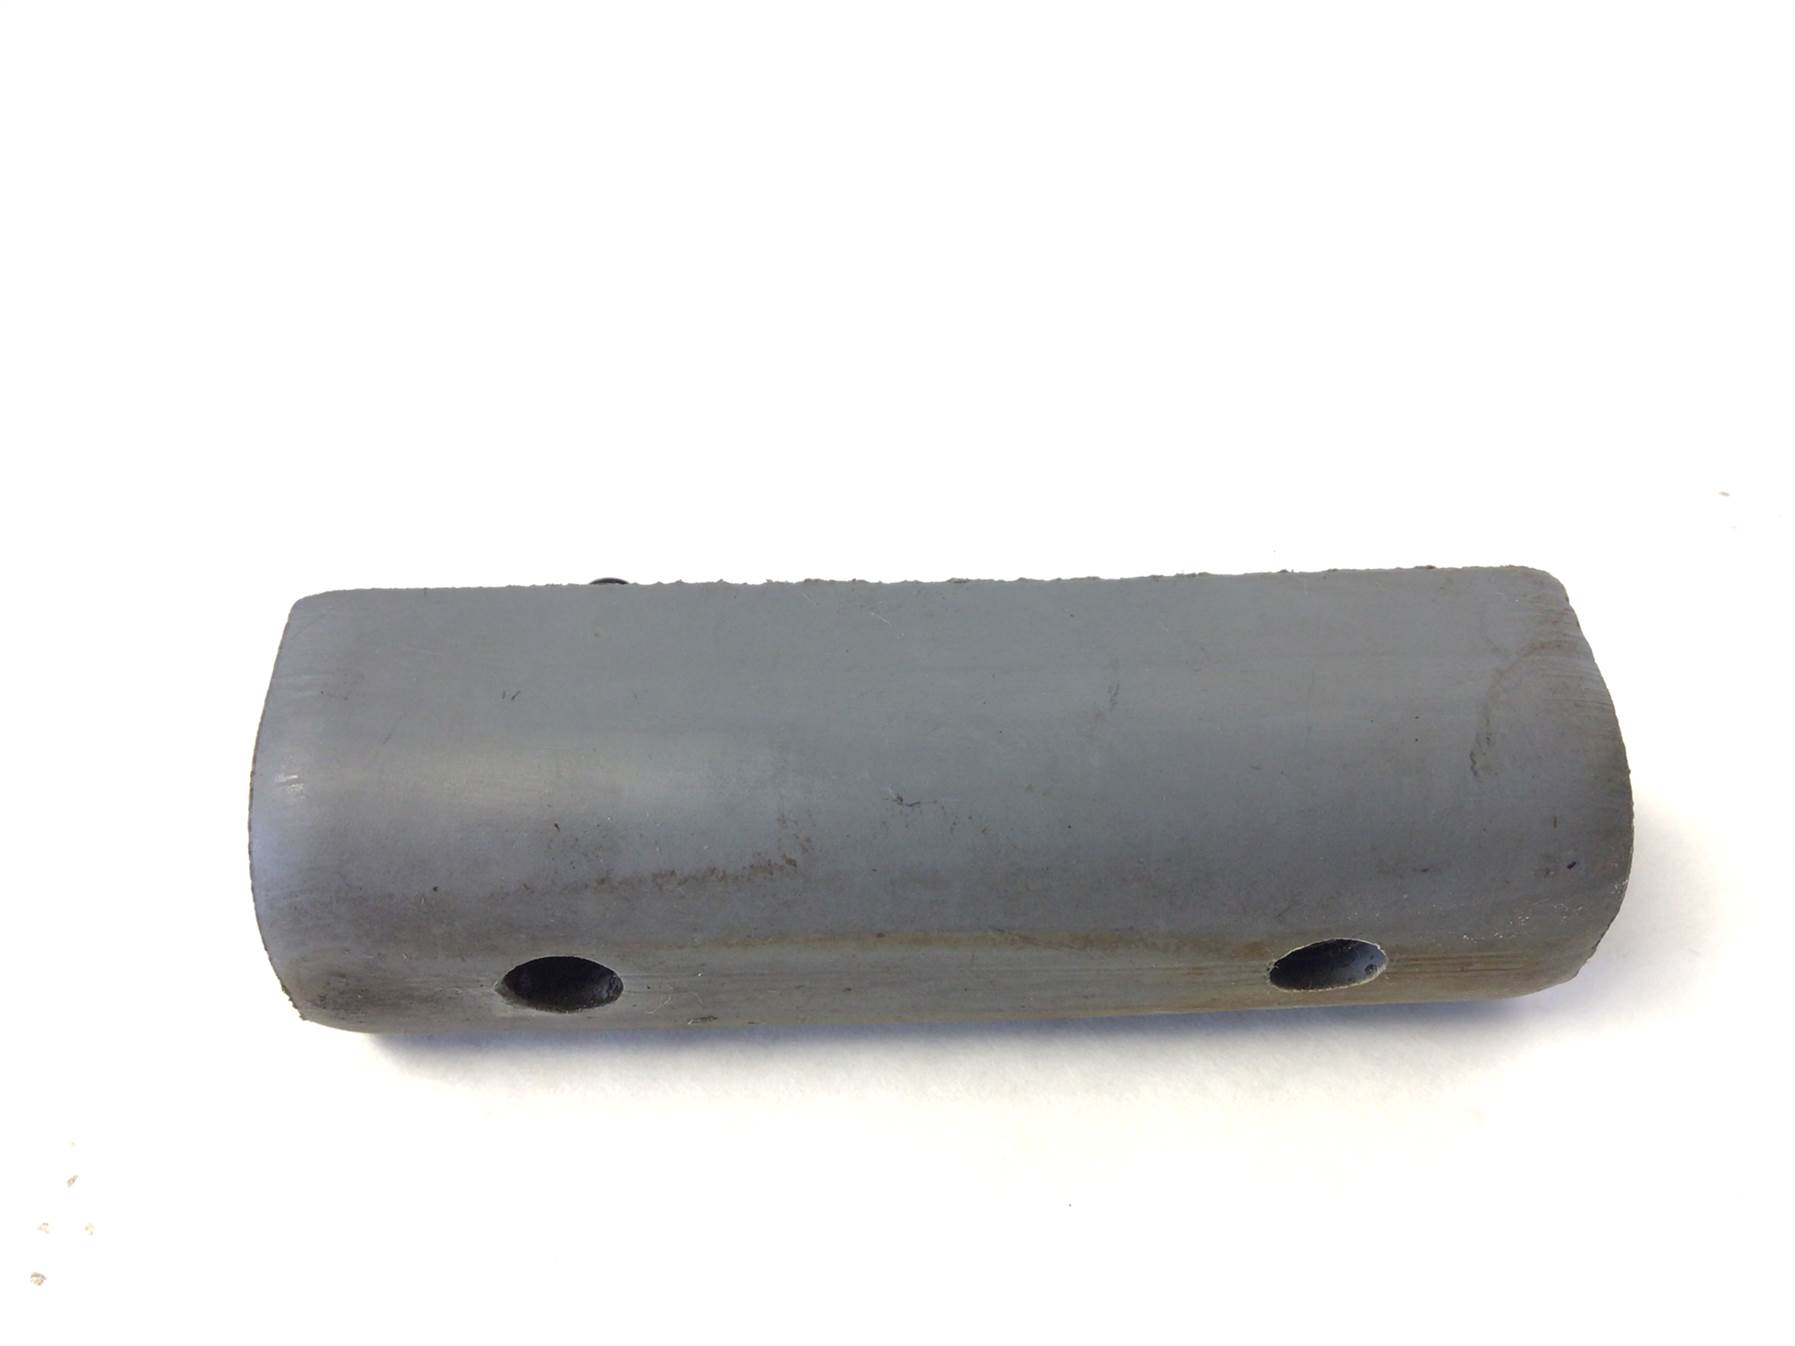 Rear Frame Foot Pad (Used)